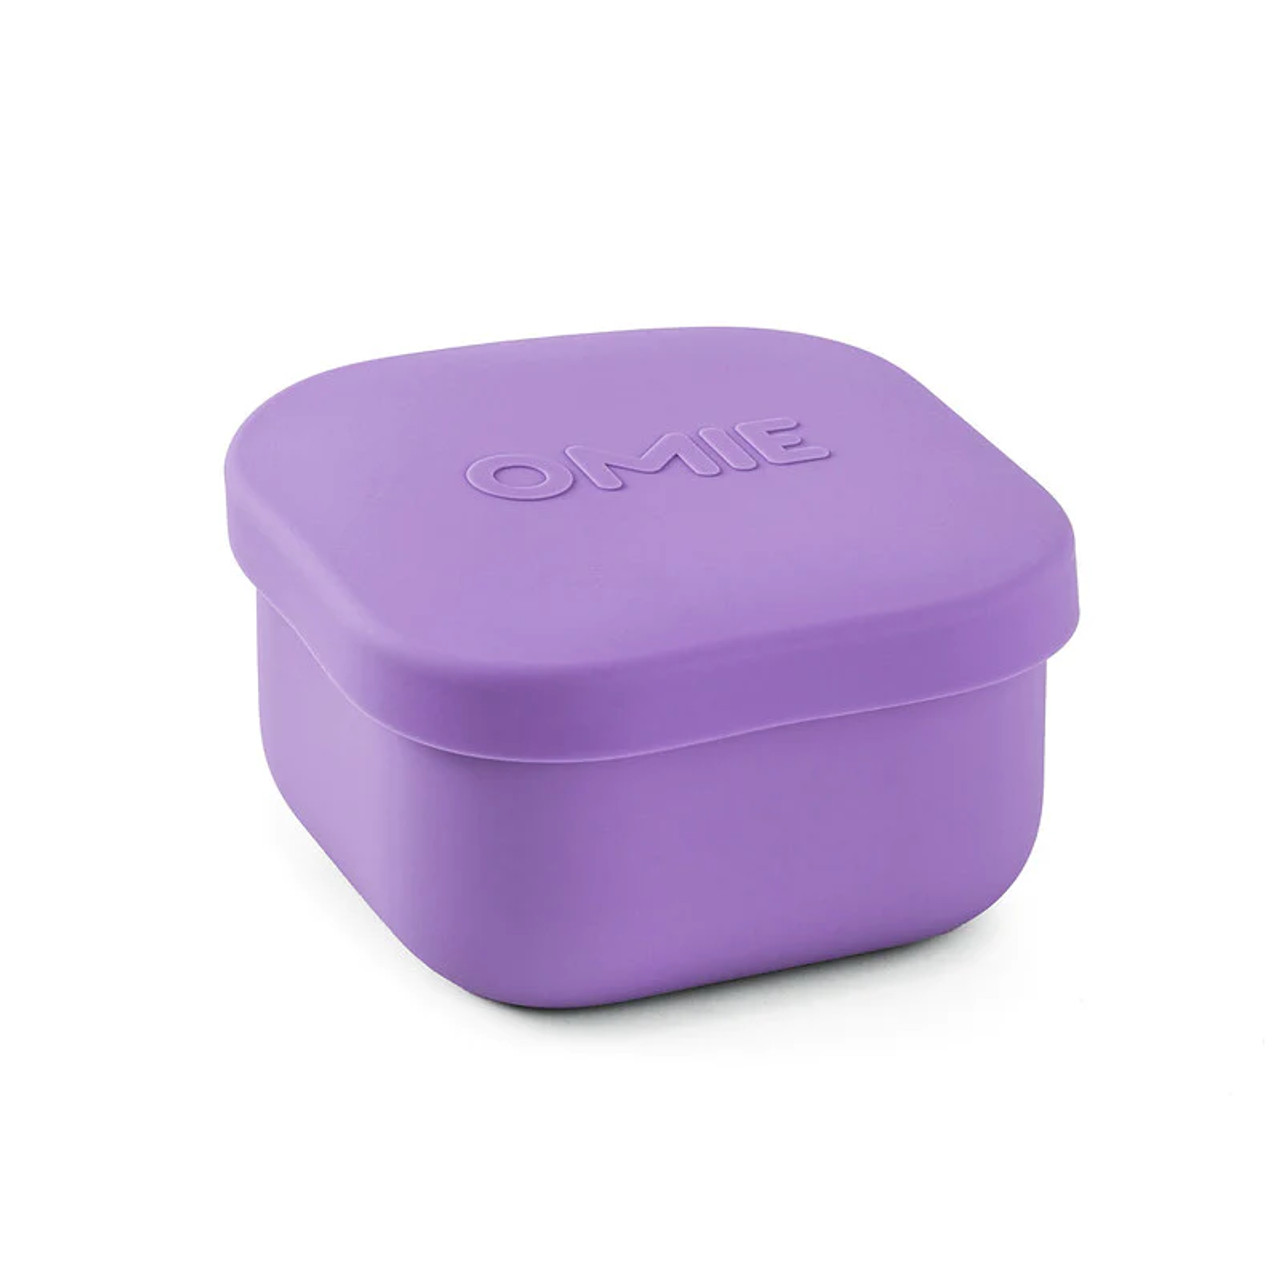 OmieLife - OmieDip is the perfect accessory to separate snacks in